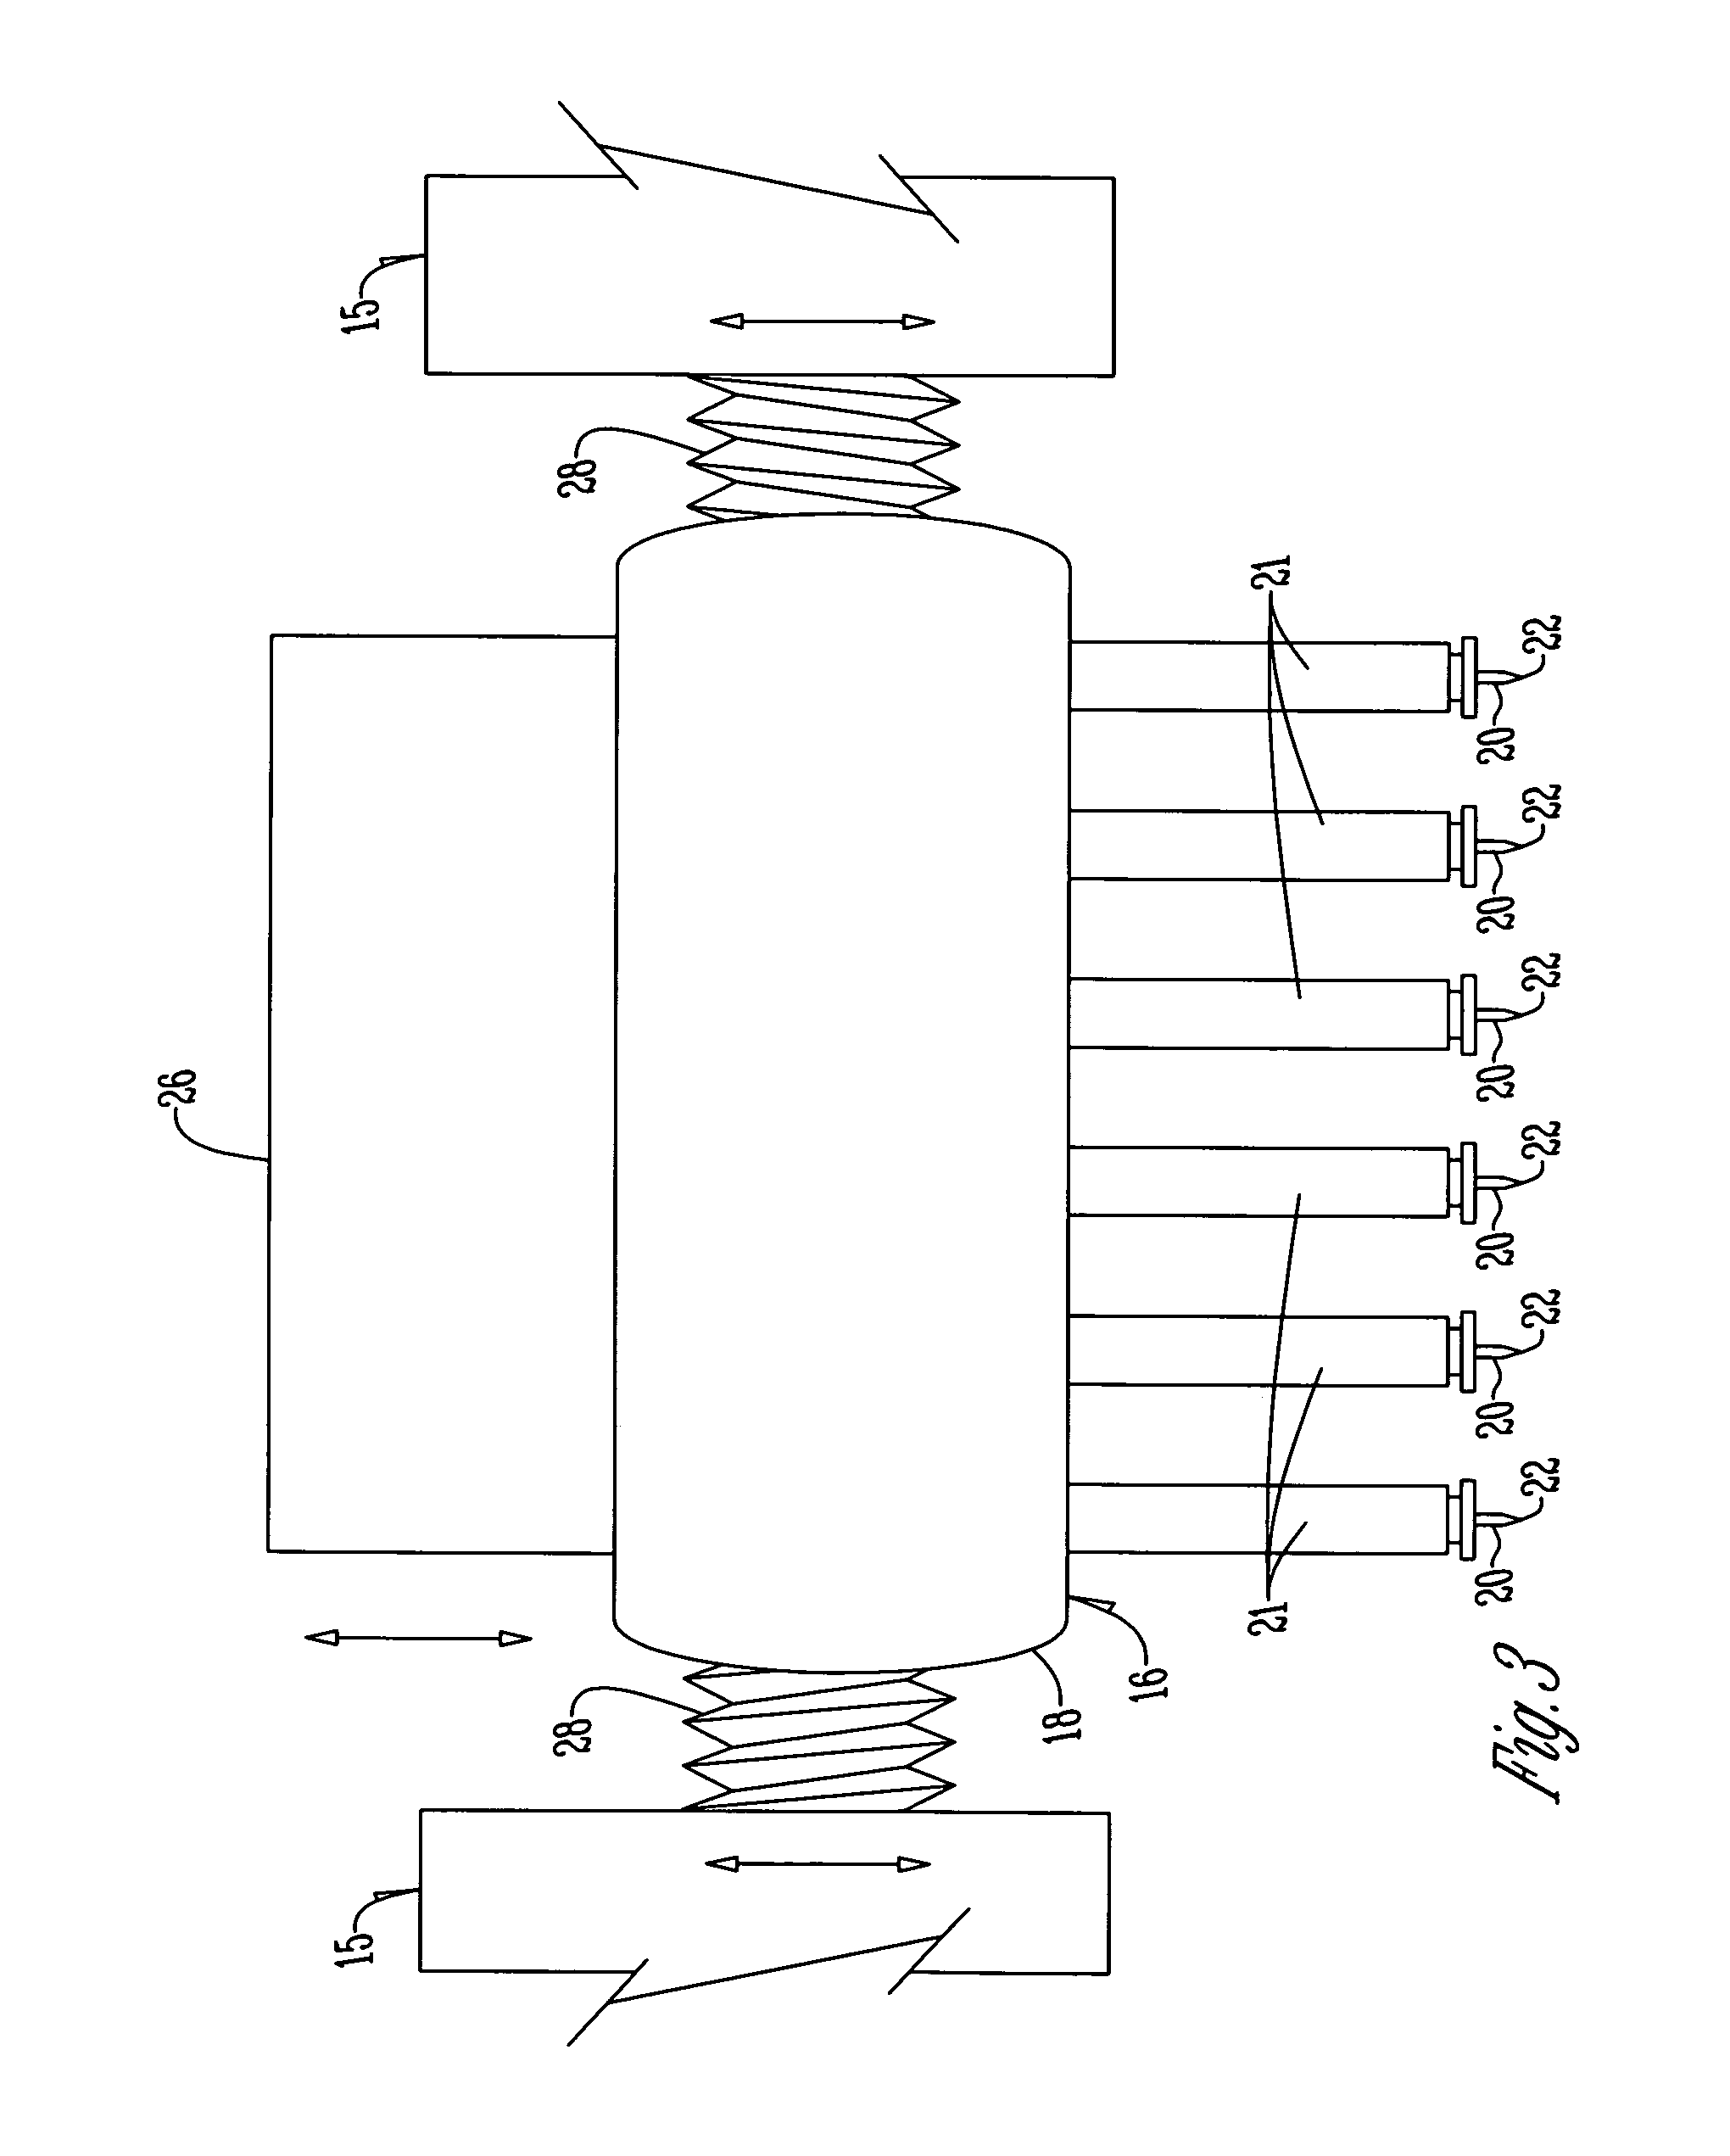 Apparatus for injecting fluid into meat products